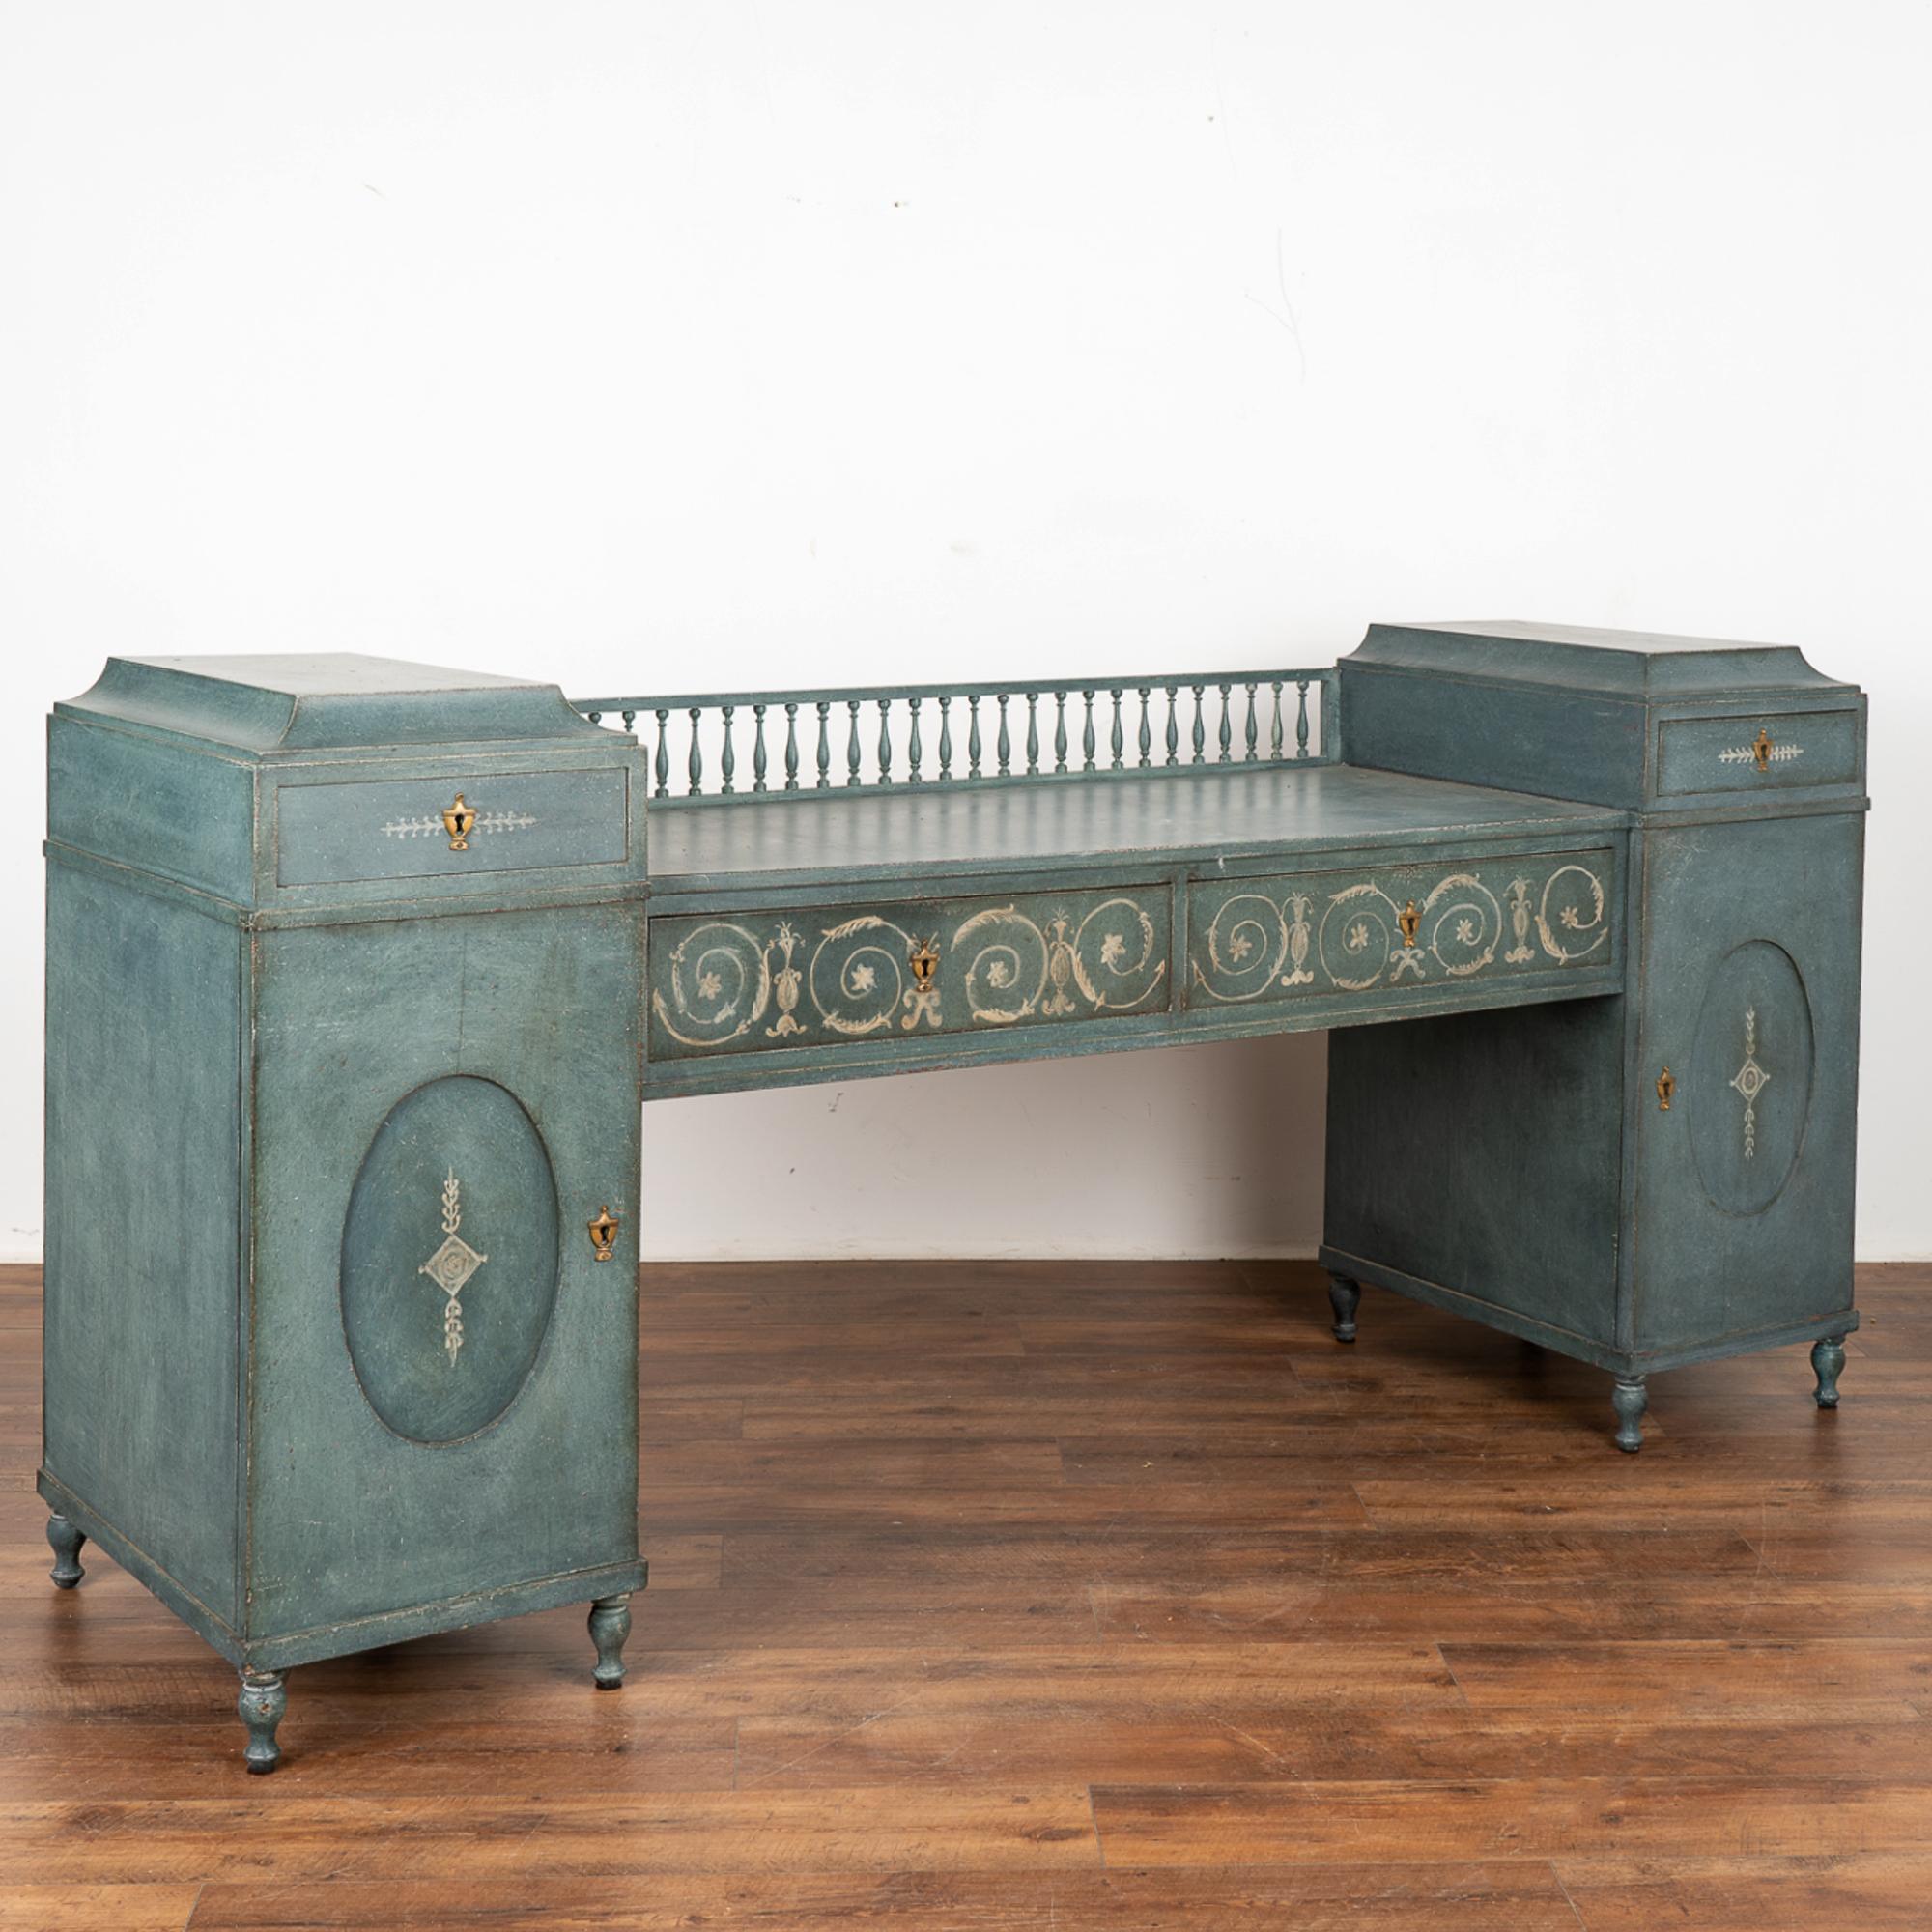 Elegant English sideboard with spindle back which will serve well as a buffet or console.
The later applied old layered blue painted finish with white flourishes adds to the sophisticated appeal of this server.
See photos with all the doors and